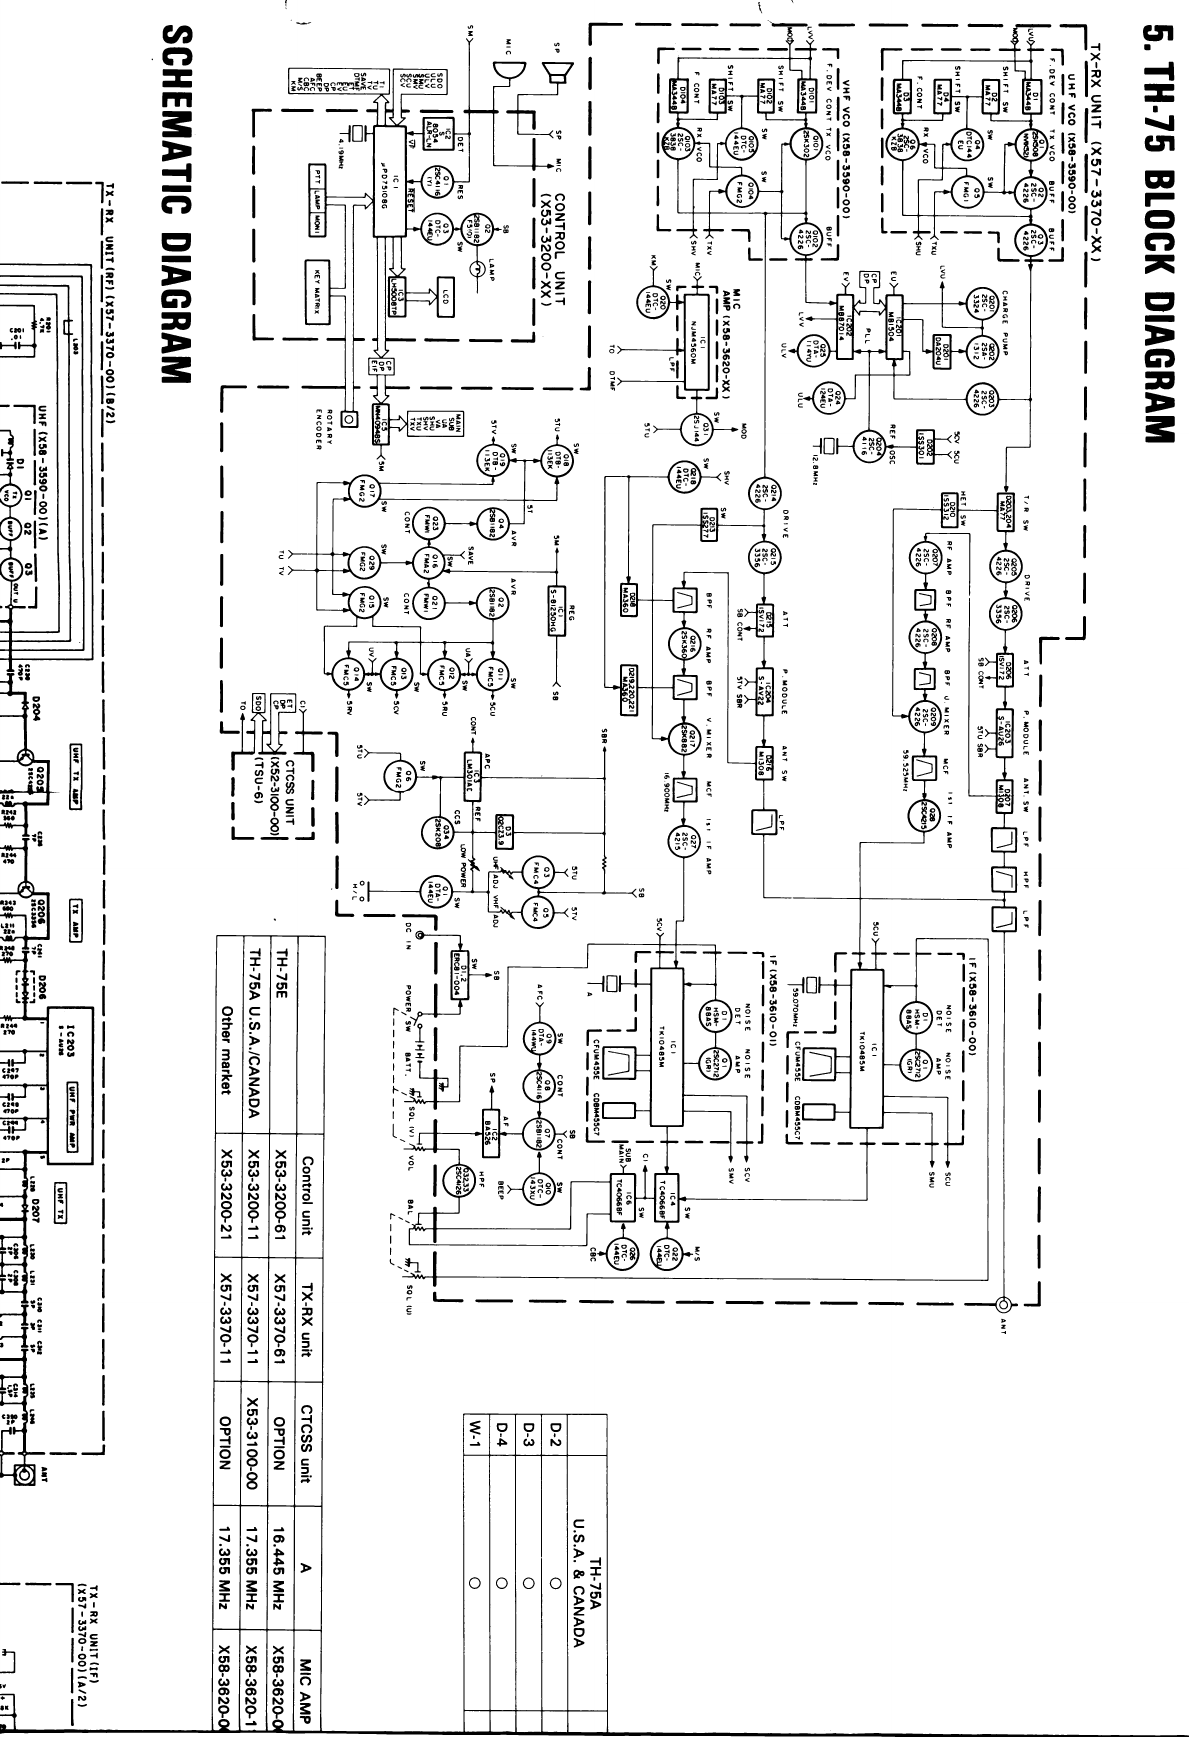 Page 1 of 4 - KENWOOD--TH-75-Schematic